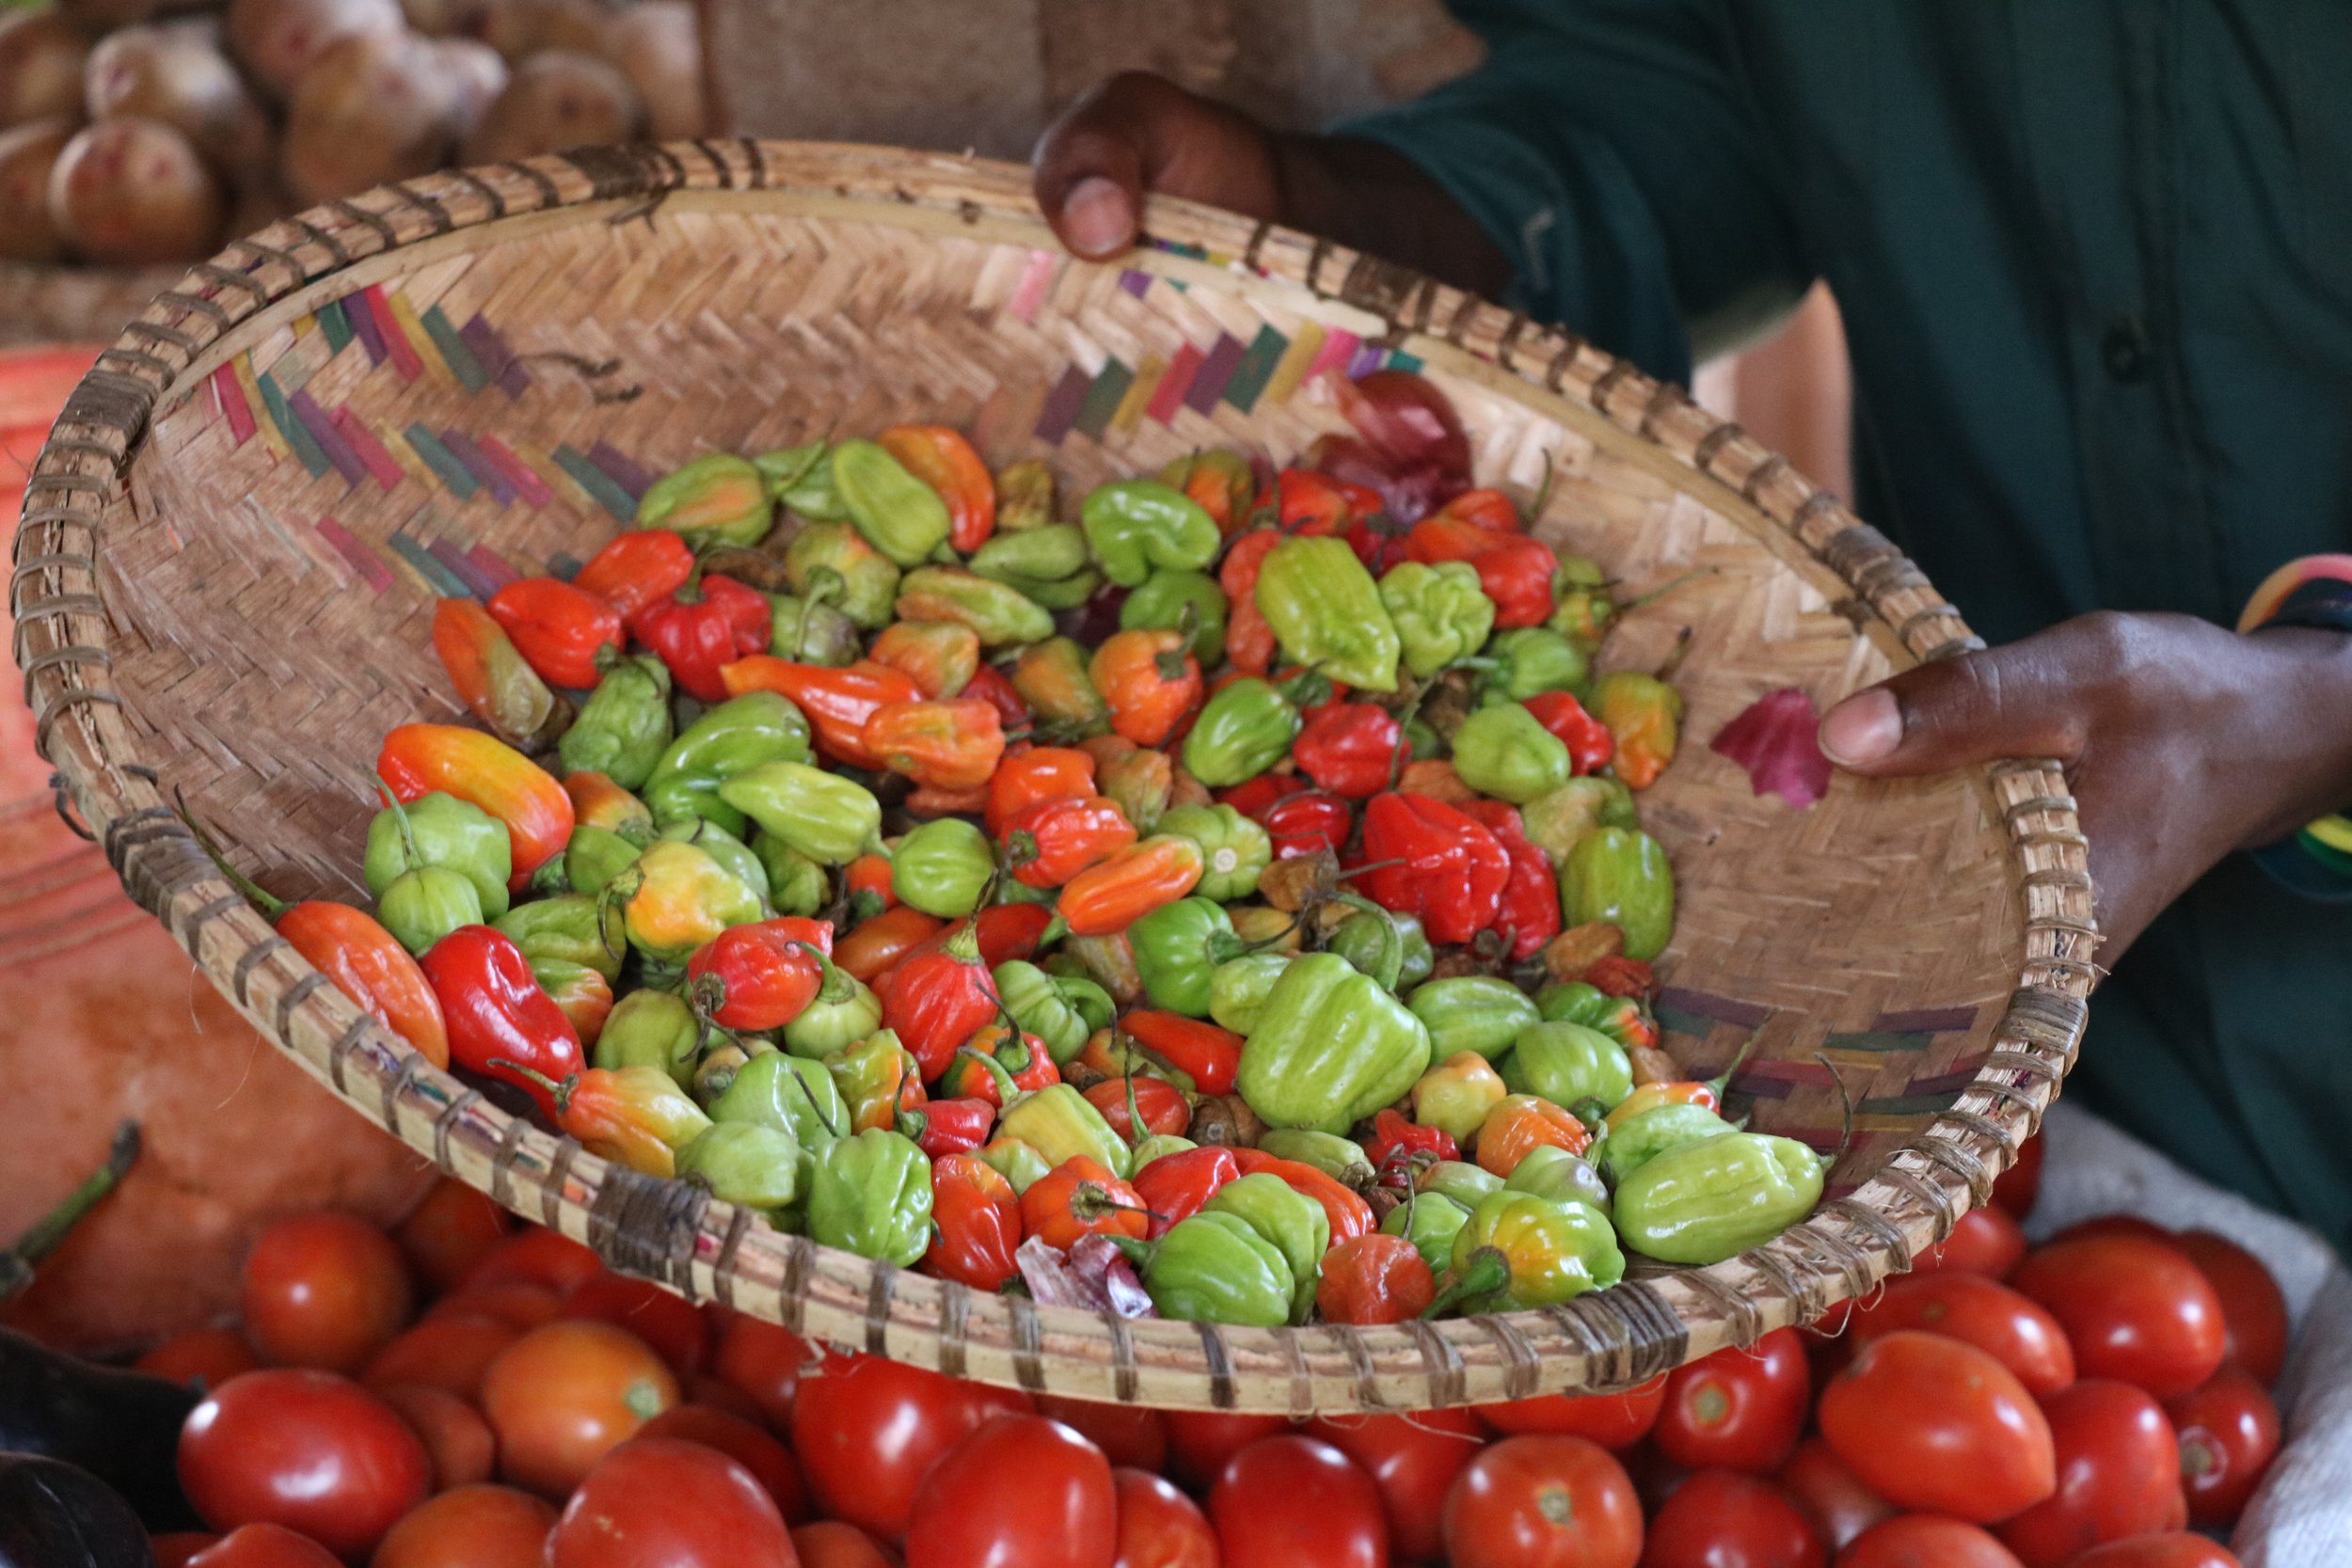 variety of peppers in Tanzania.JPG